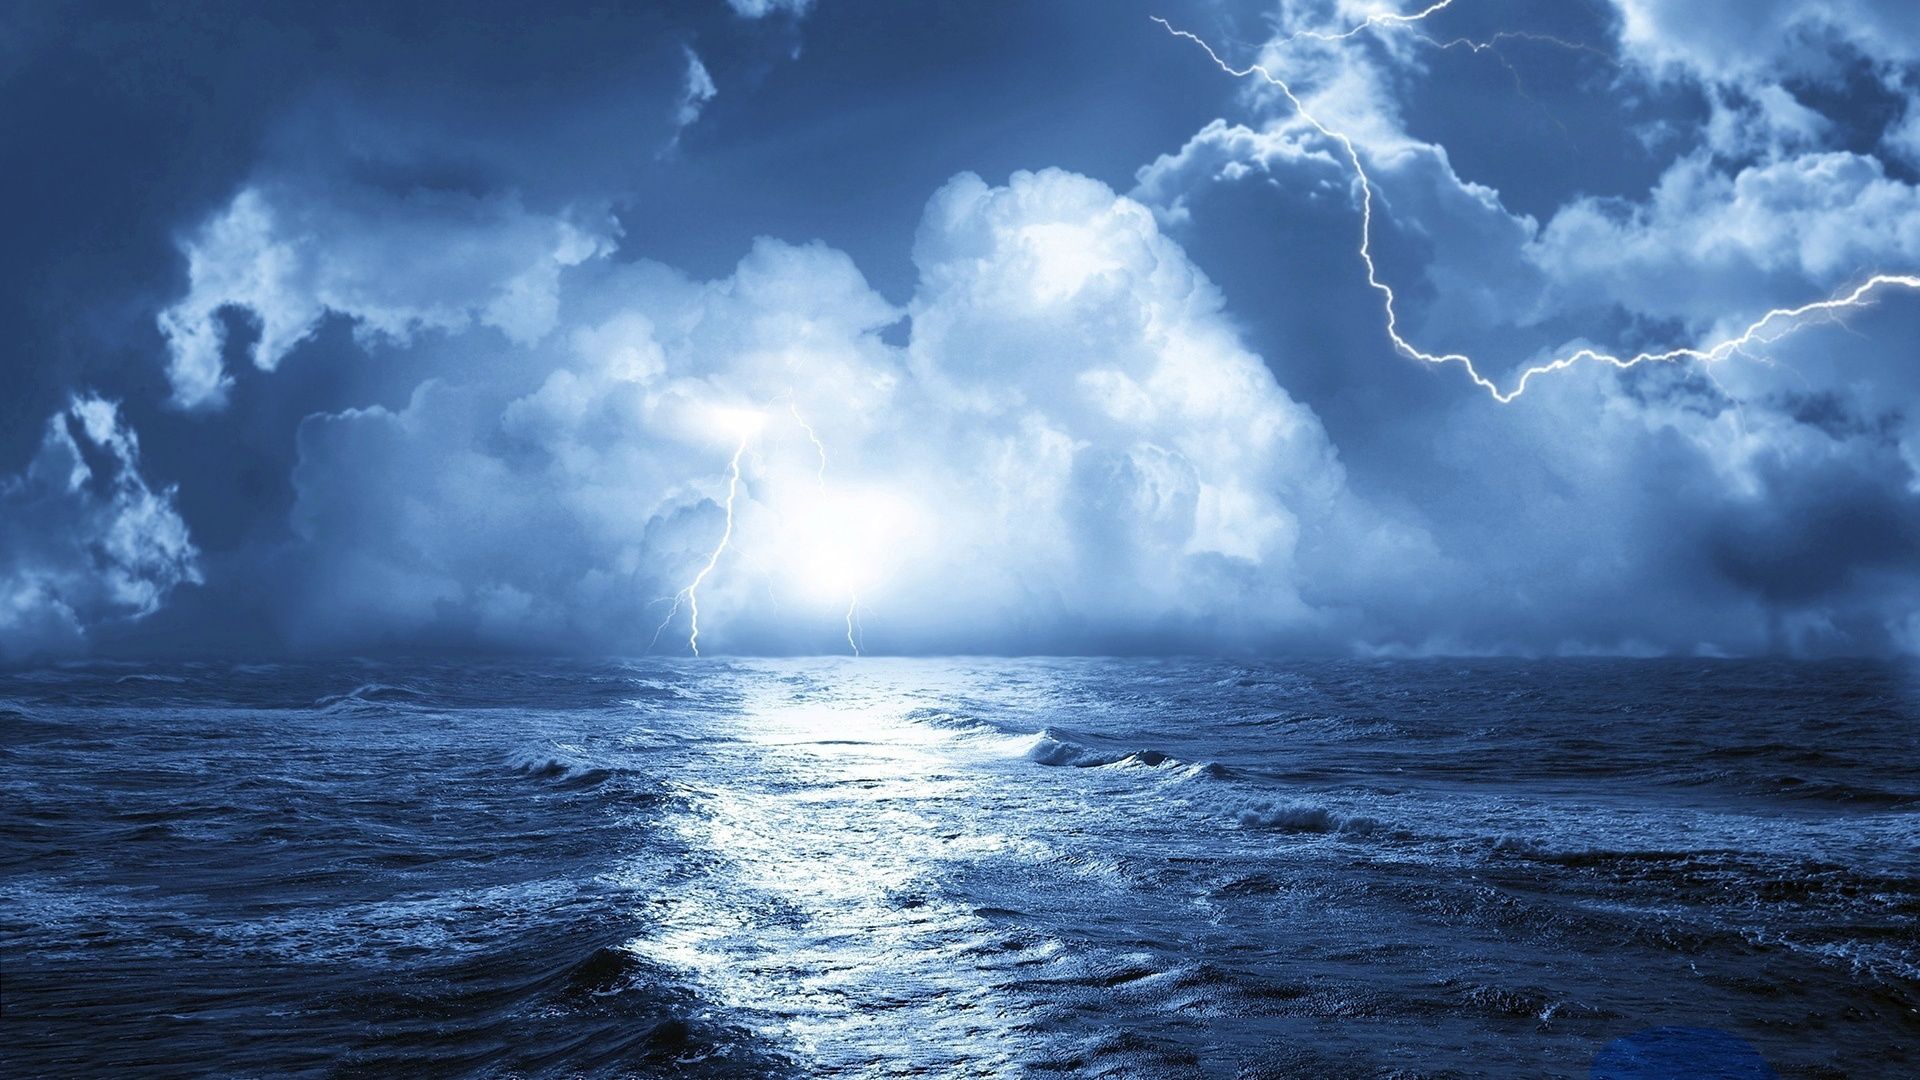 Storms Wallpapers 4k Hd Storms Backgrounds On Wallpaperbat